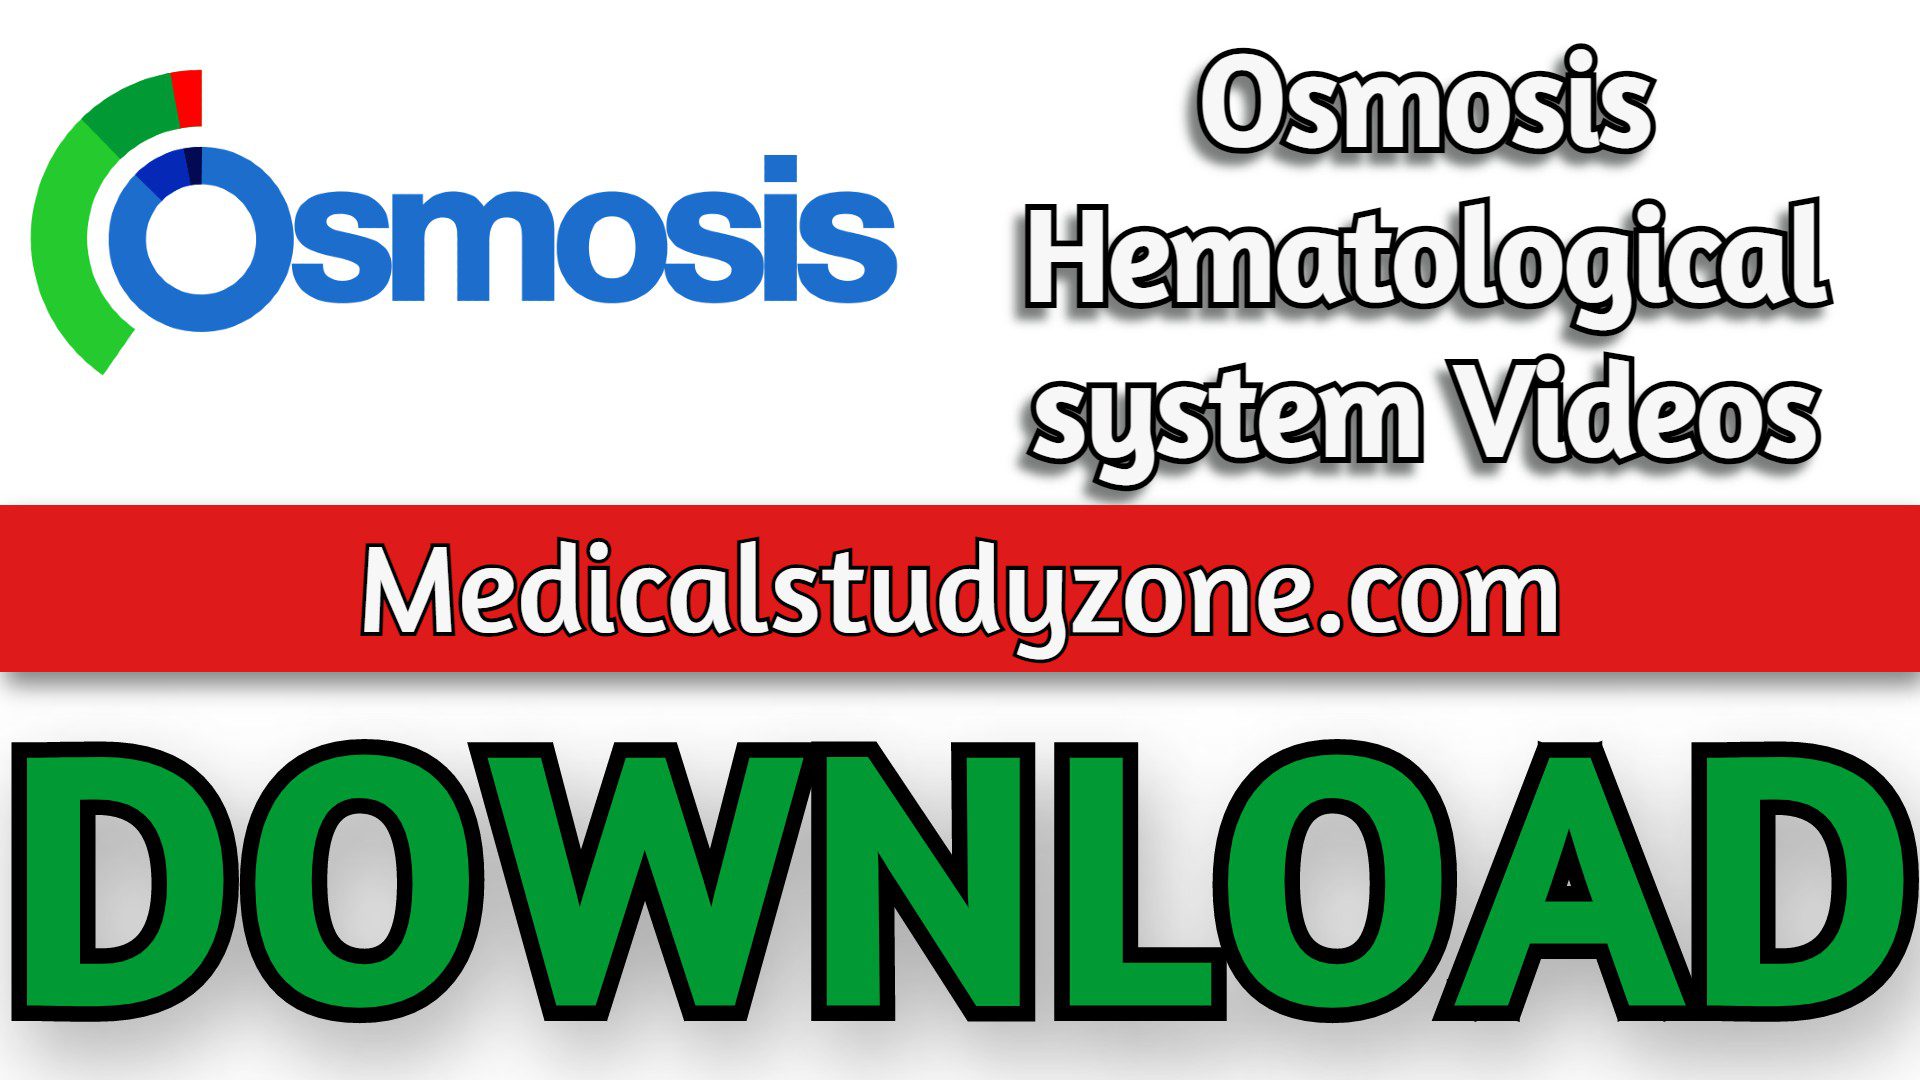 Osmosis Hematological system Videos 2023 Free Download